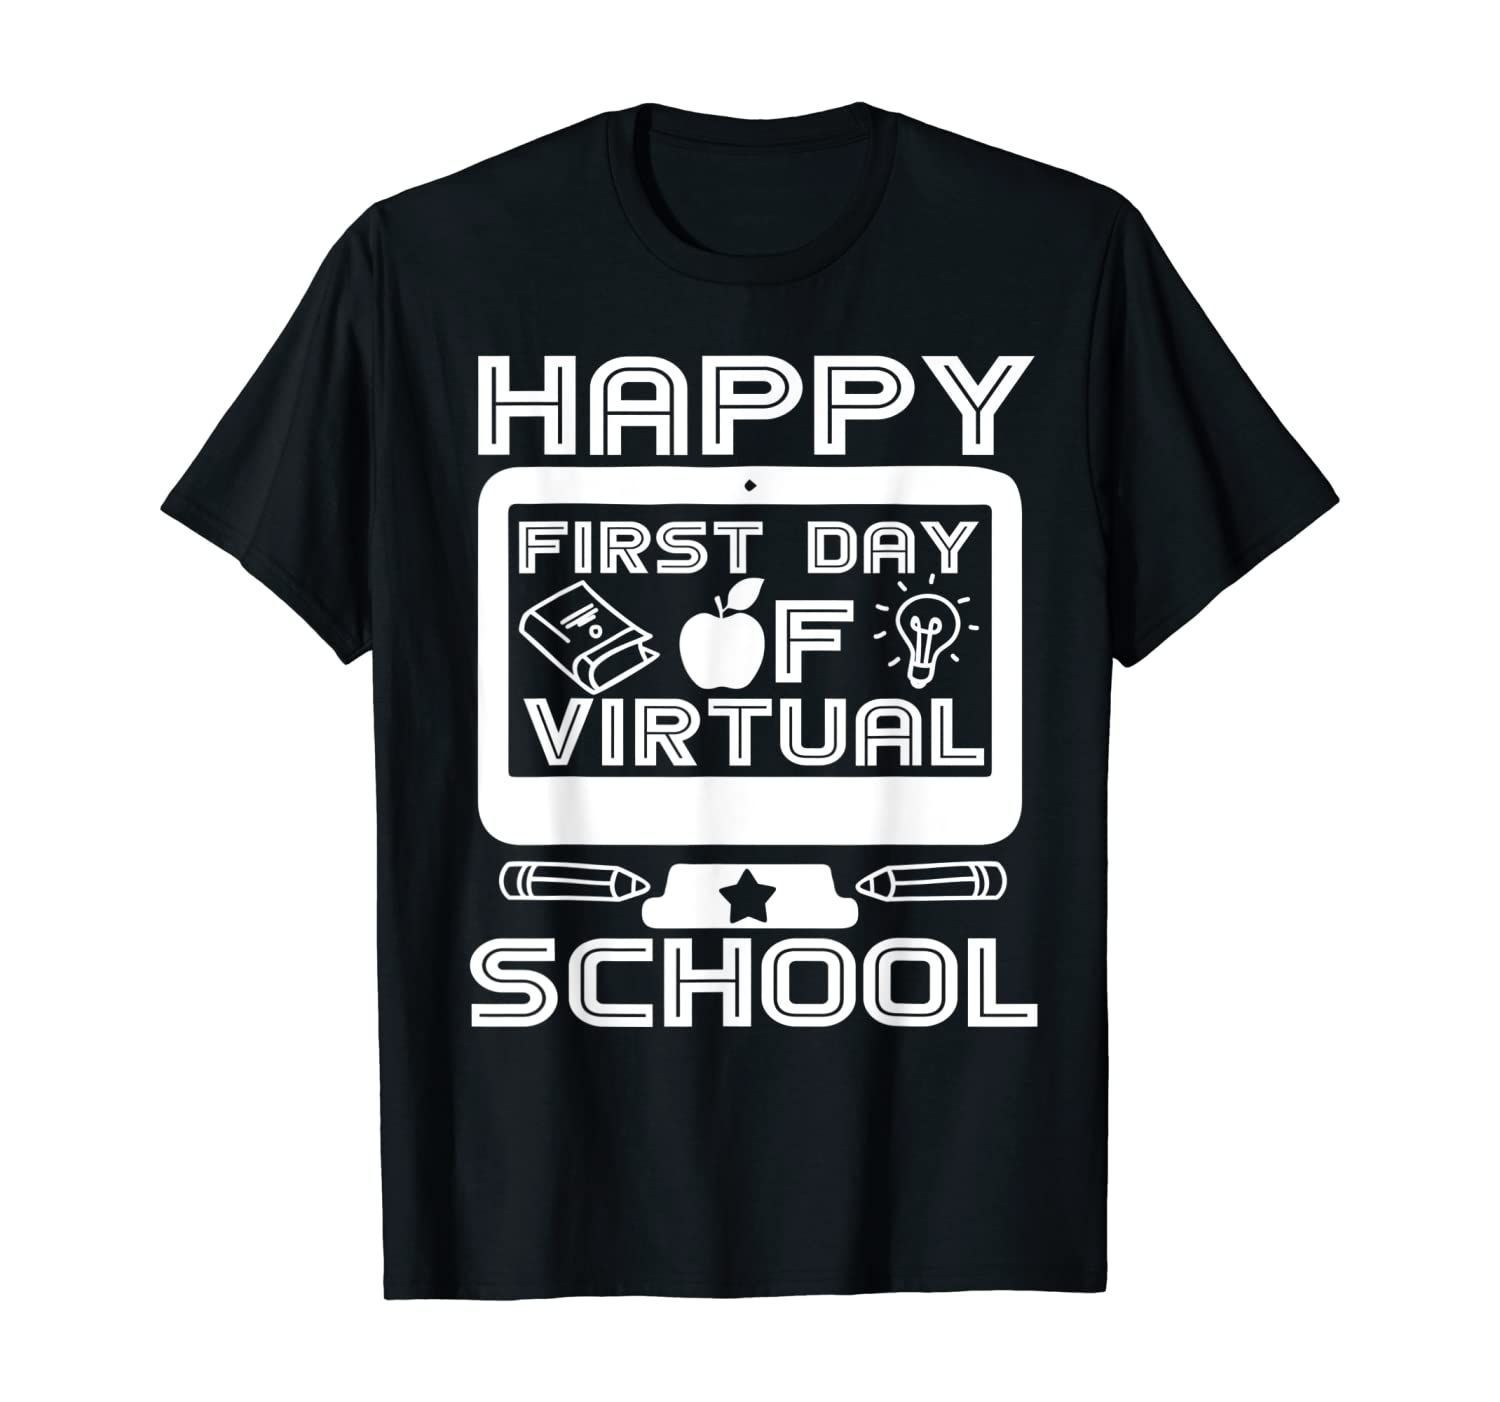 Funny Happy First Day Virtual Back To School 2020 Gifts Boys Girls T-Shirt